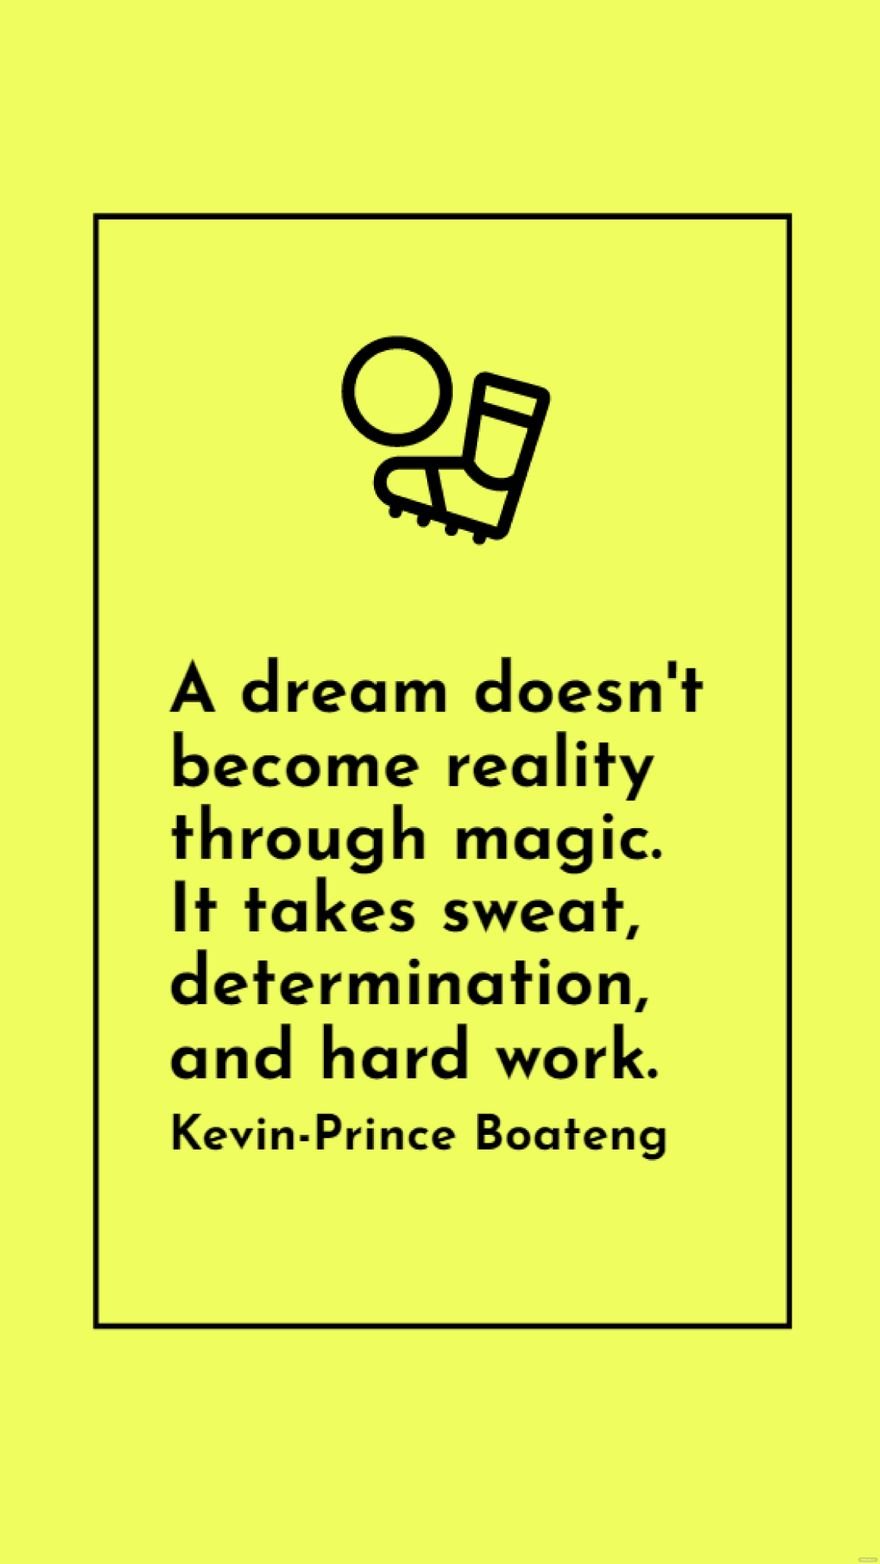 Kevin-Prince Boateng - A dream doesn't become reality through magic. It takes sweat, determination, and hard work.